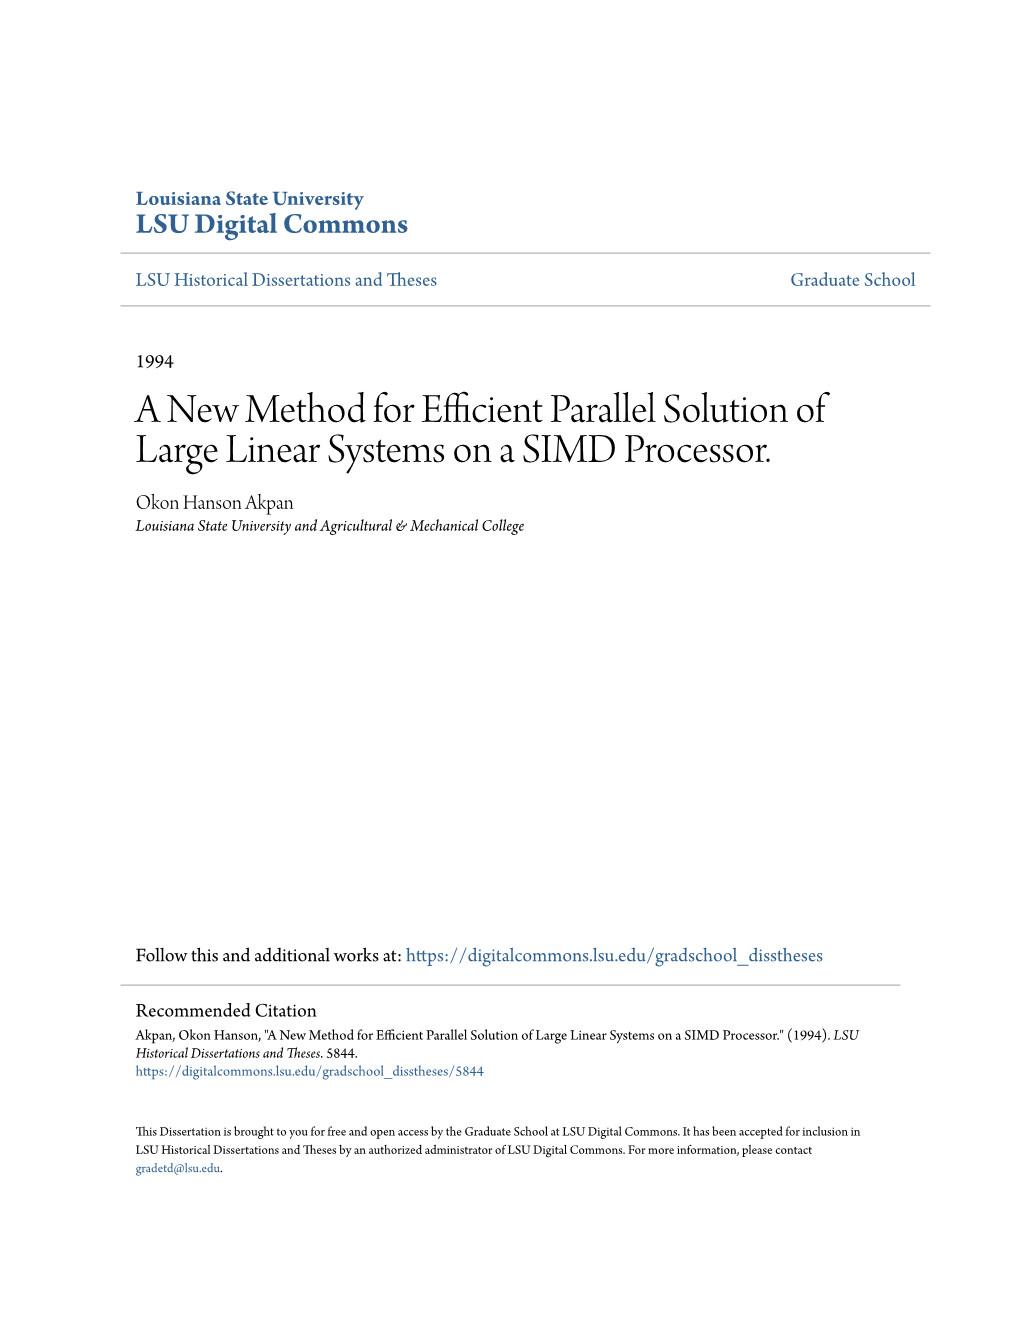 A New Method for Efficient Parallel Solution of Large Linear Systems on a SIMD Processor